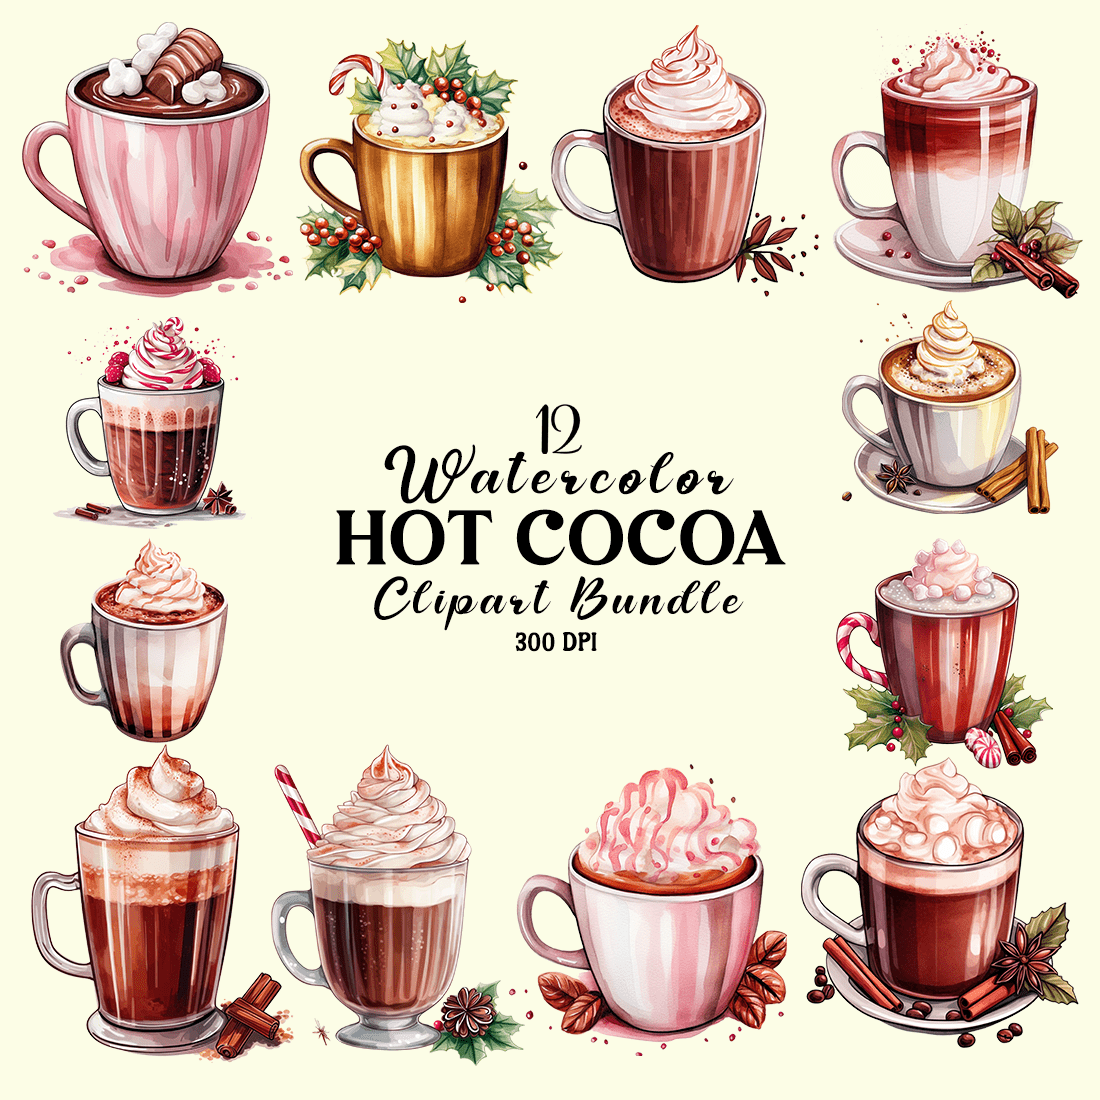 Watercolor Hot Cocoa Clipart Bundle cover image.